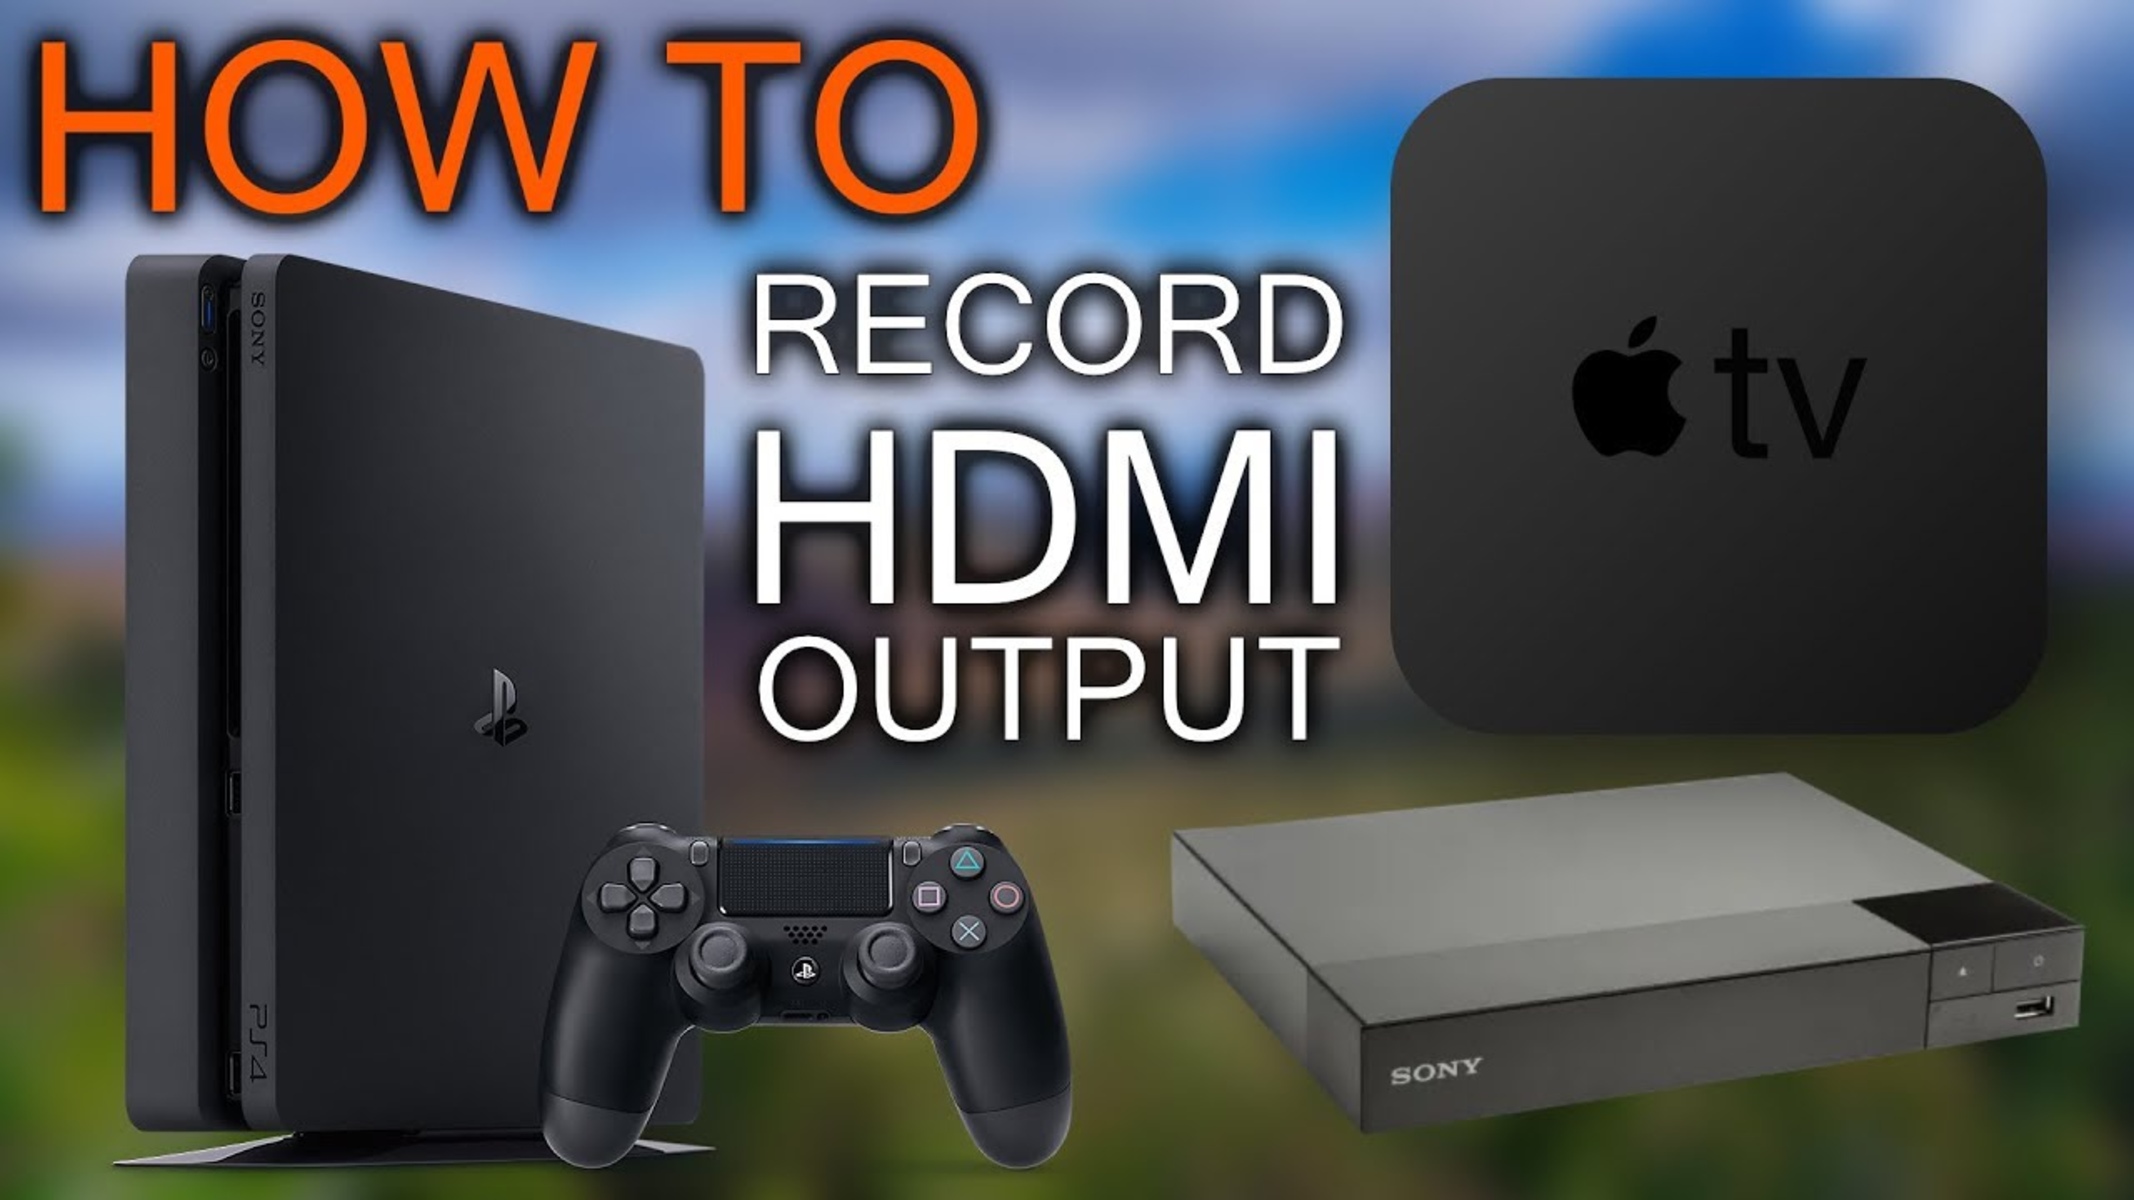 How To Record From HDMI Output